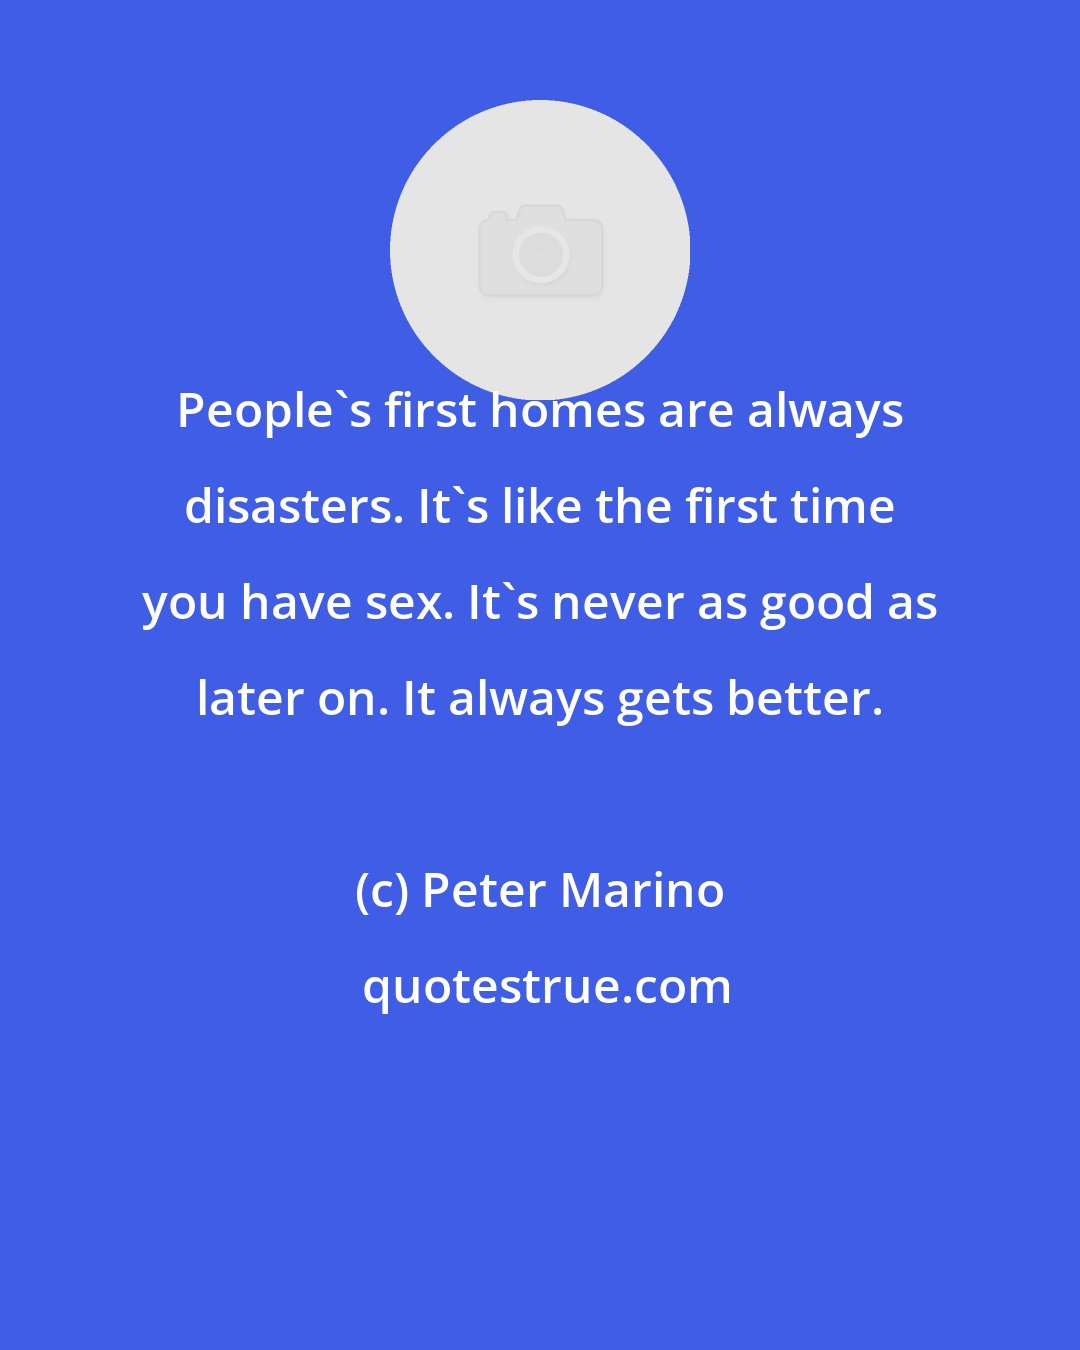 Peter Marino: People's first homes are always disasters. It's like the first time you have sex. It's never as good as later on. It always gets better.